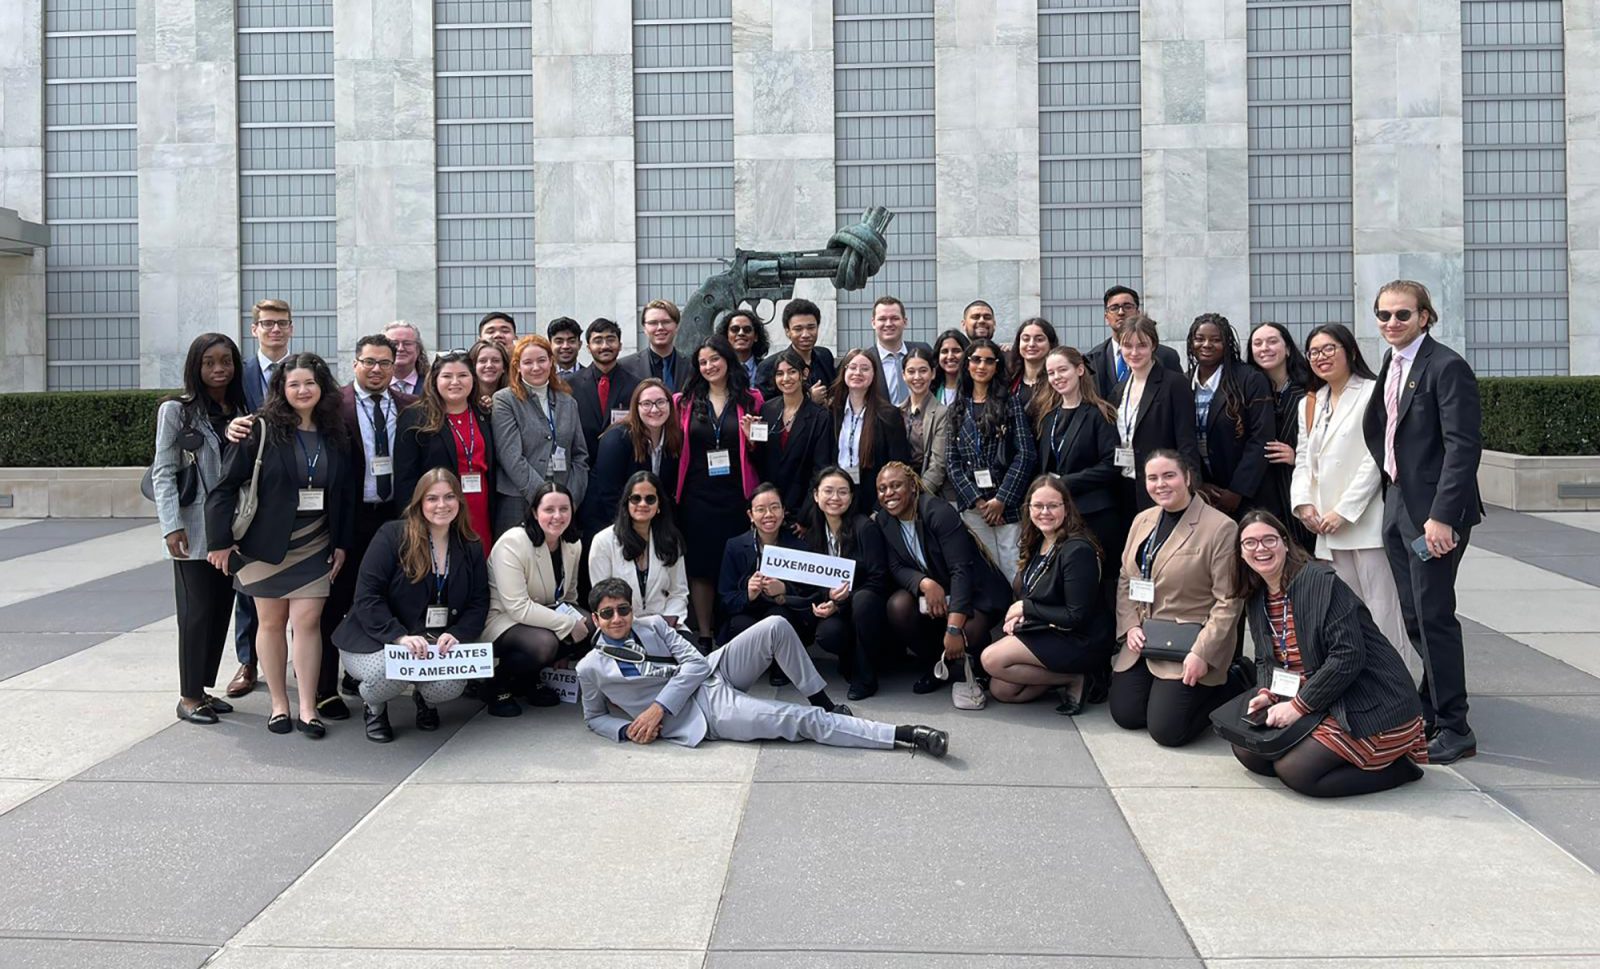 The Brock Model UN team stands in front of the UN Headquarters in New York City.